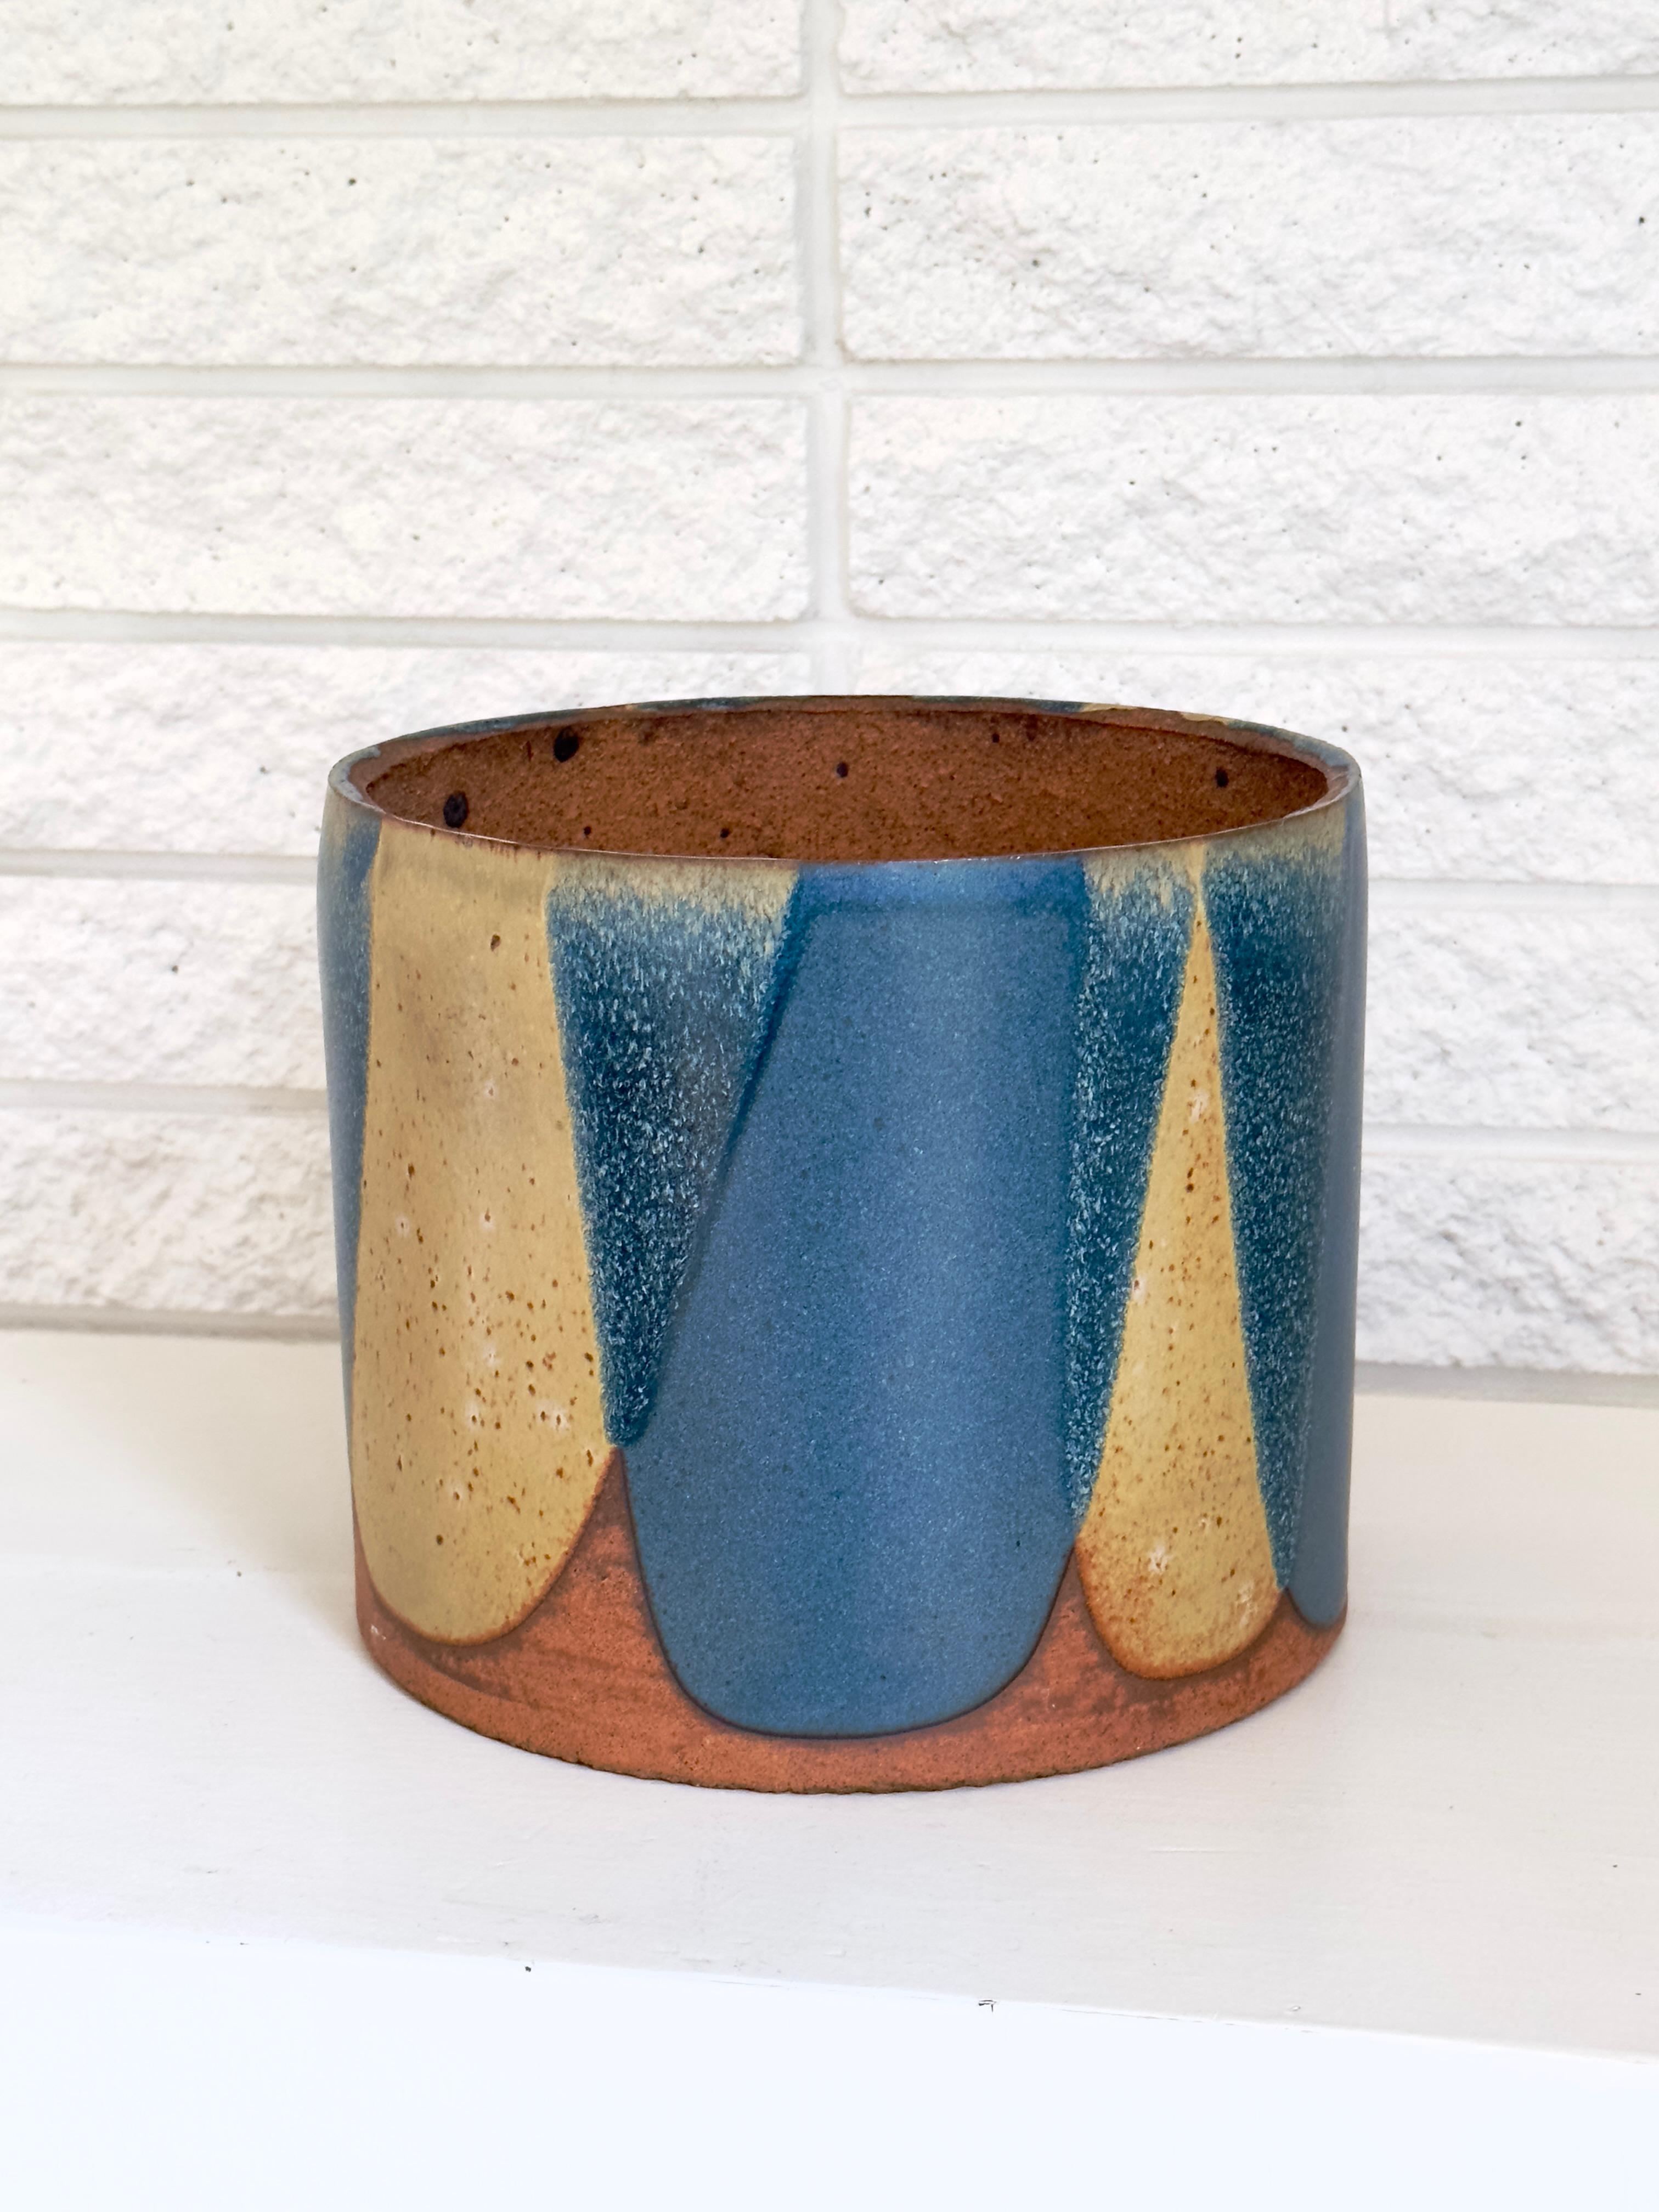 David Cressey Architectural Pottery Pro Artisan series flame glaze stoneware planter

Cylindrical form with flame glaze pattern in rarely seen Stone Blue and Sienna Yellow glaze combination
Great versatile size suitable for floor or surface